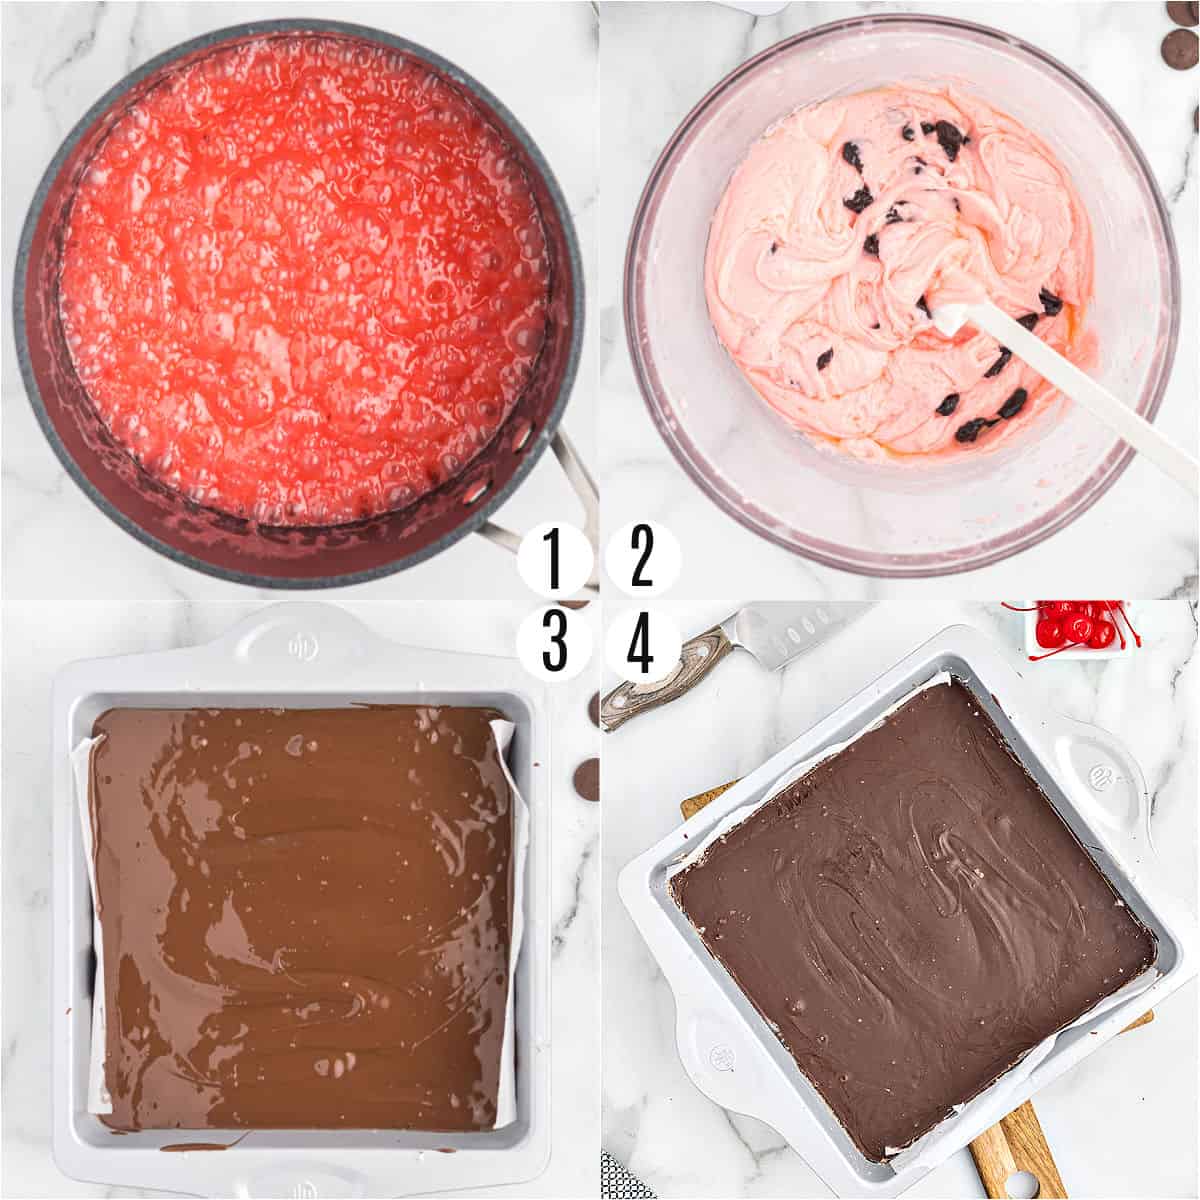 Step by step photos showing how to make cherry fudge.